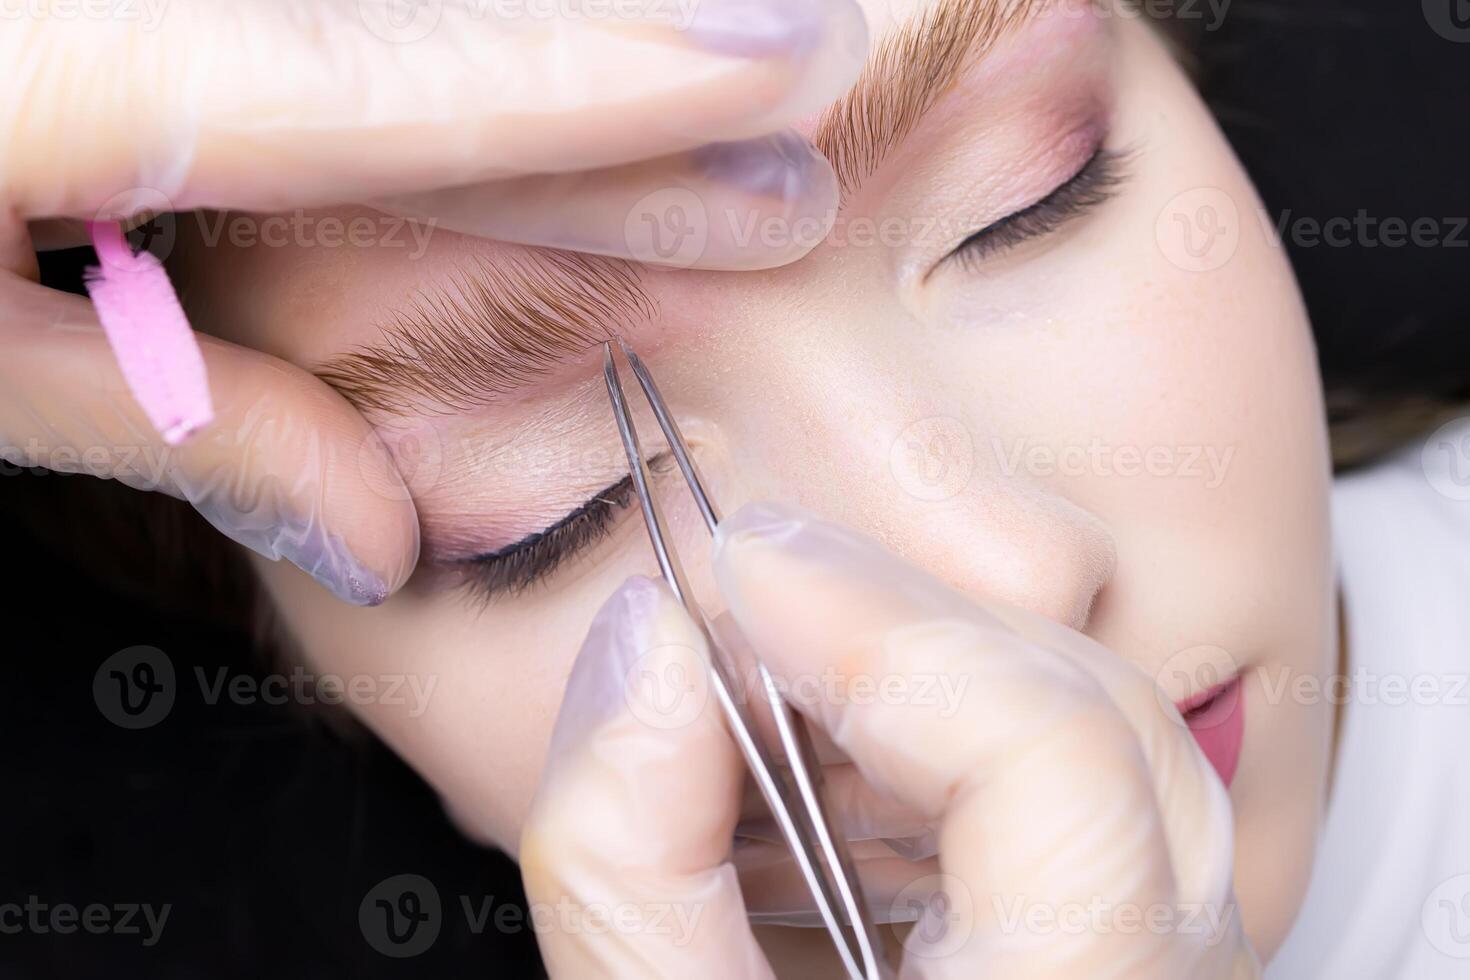 correction and plucking of excess hairs after the eyebrow lamination procedure photo